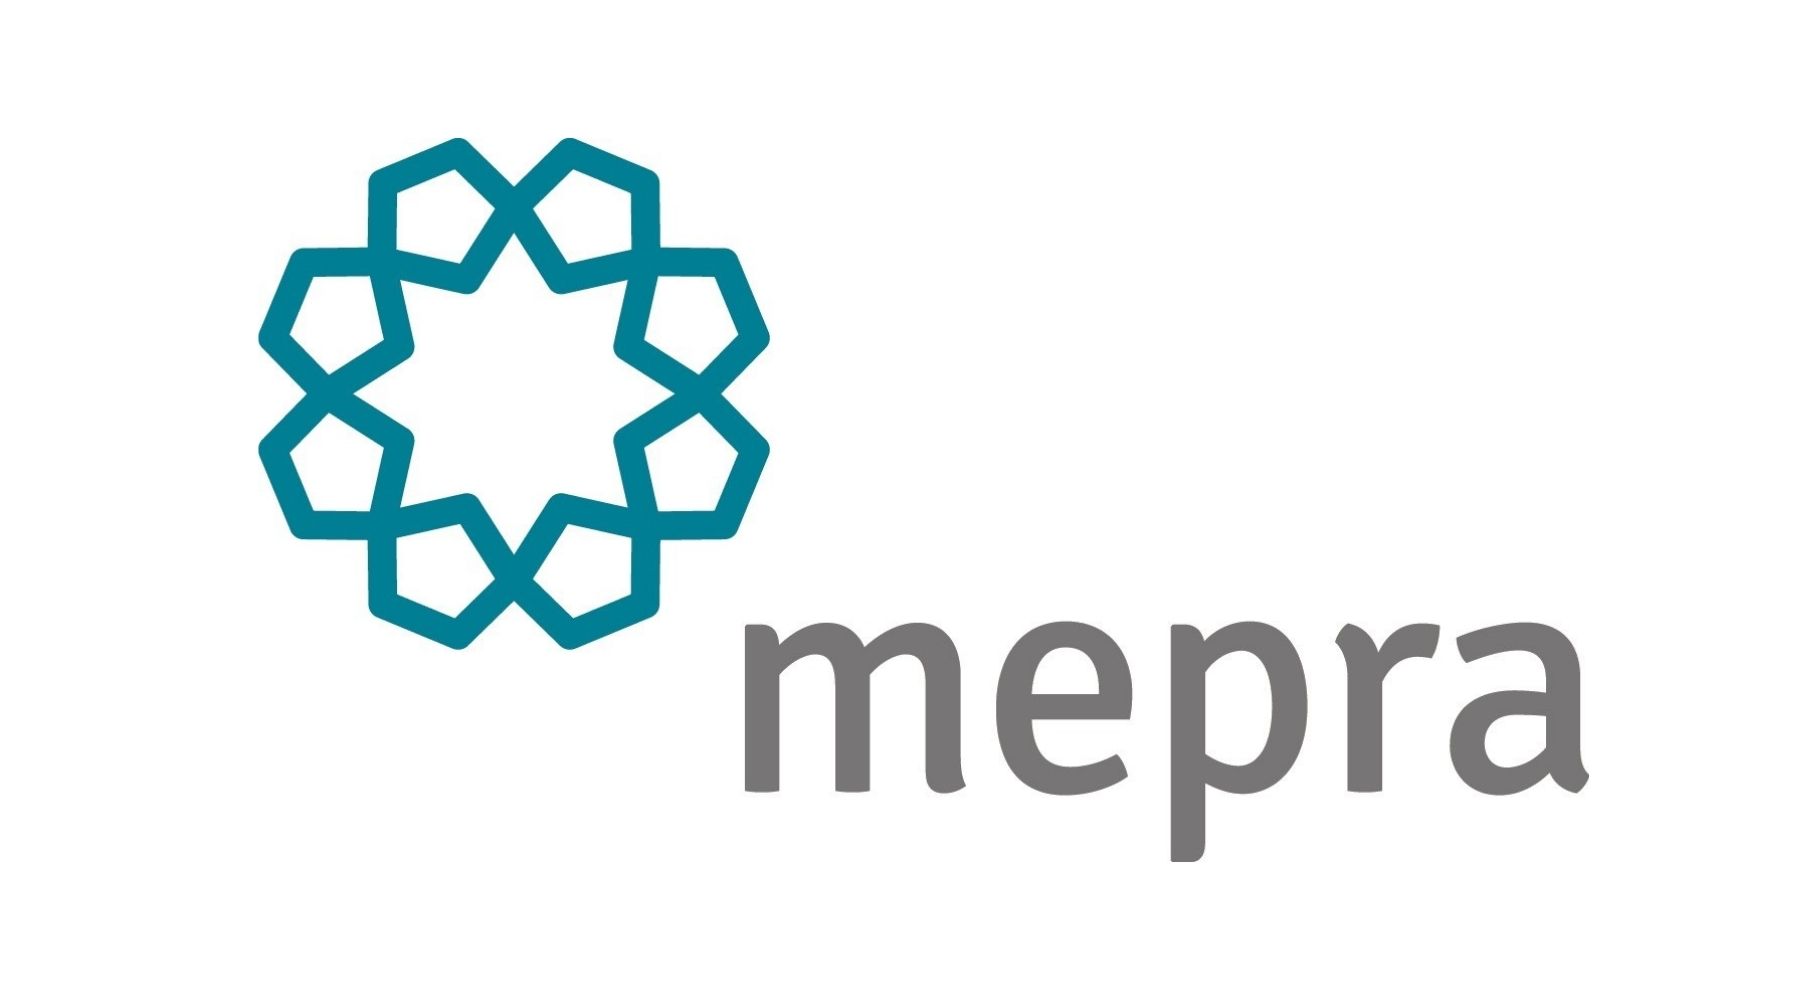 Entries Open for Inaugural Arabic Communications MEPRA Awards